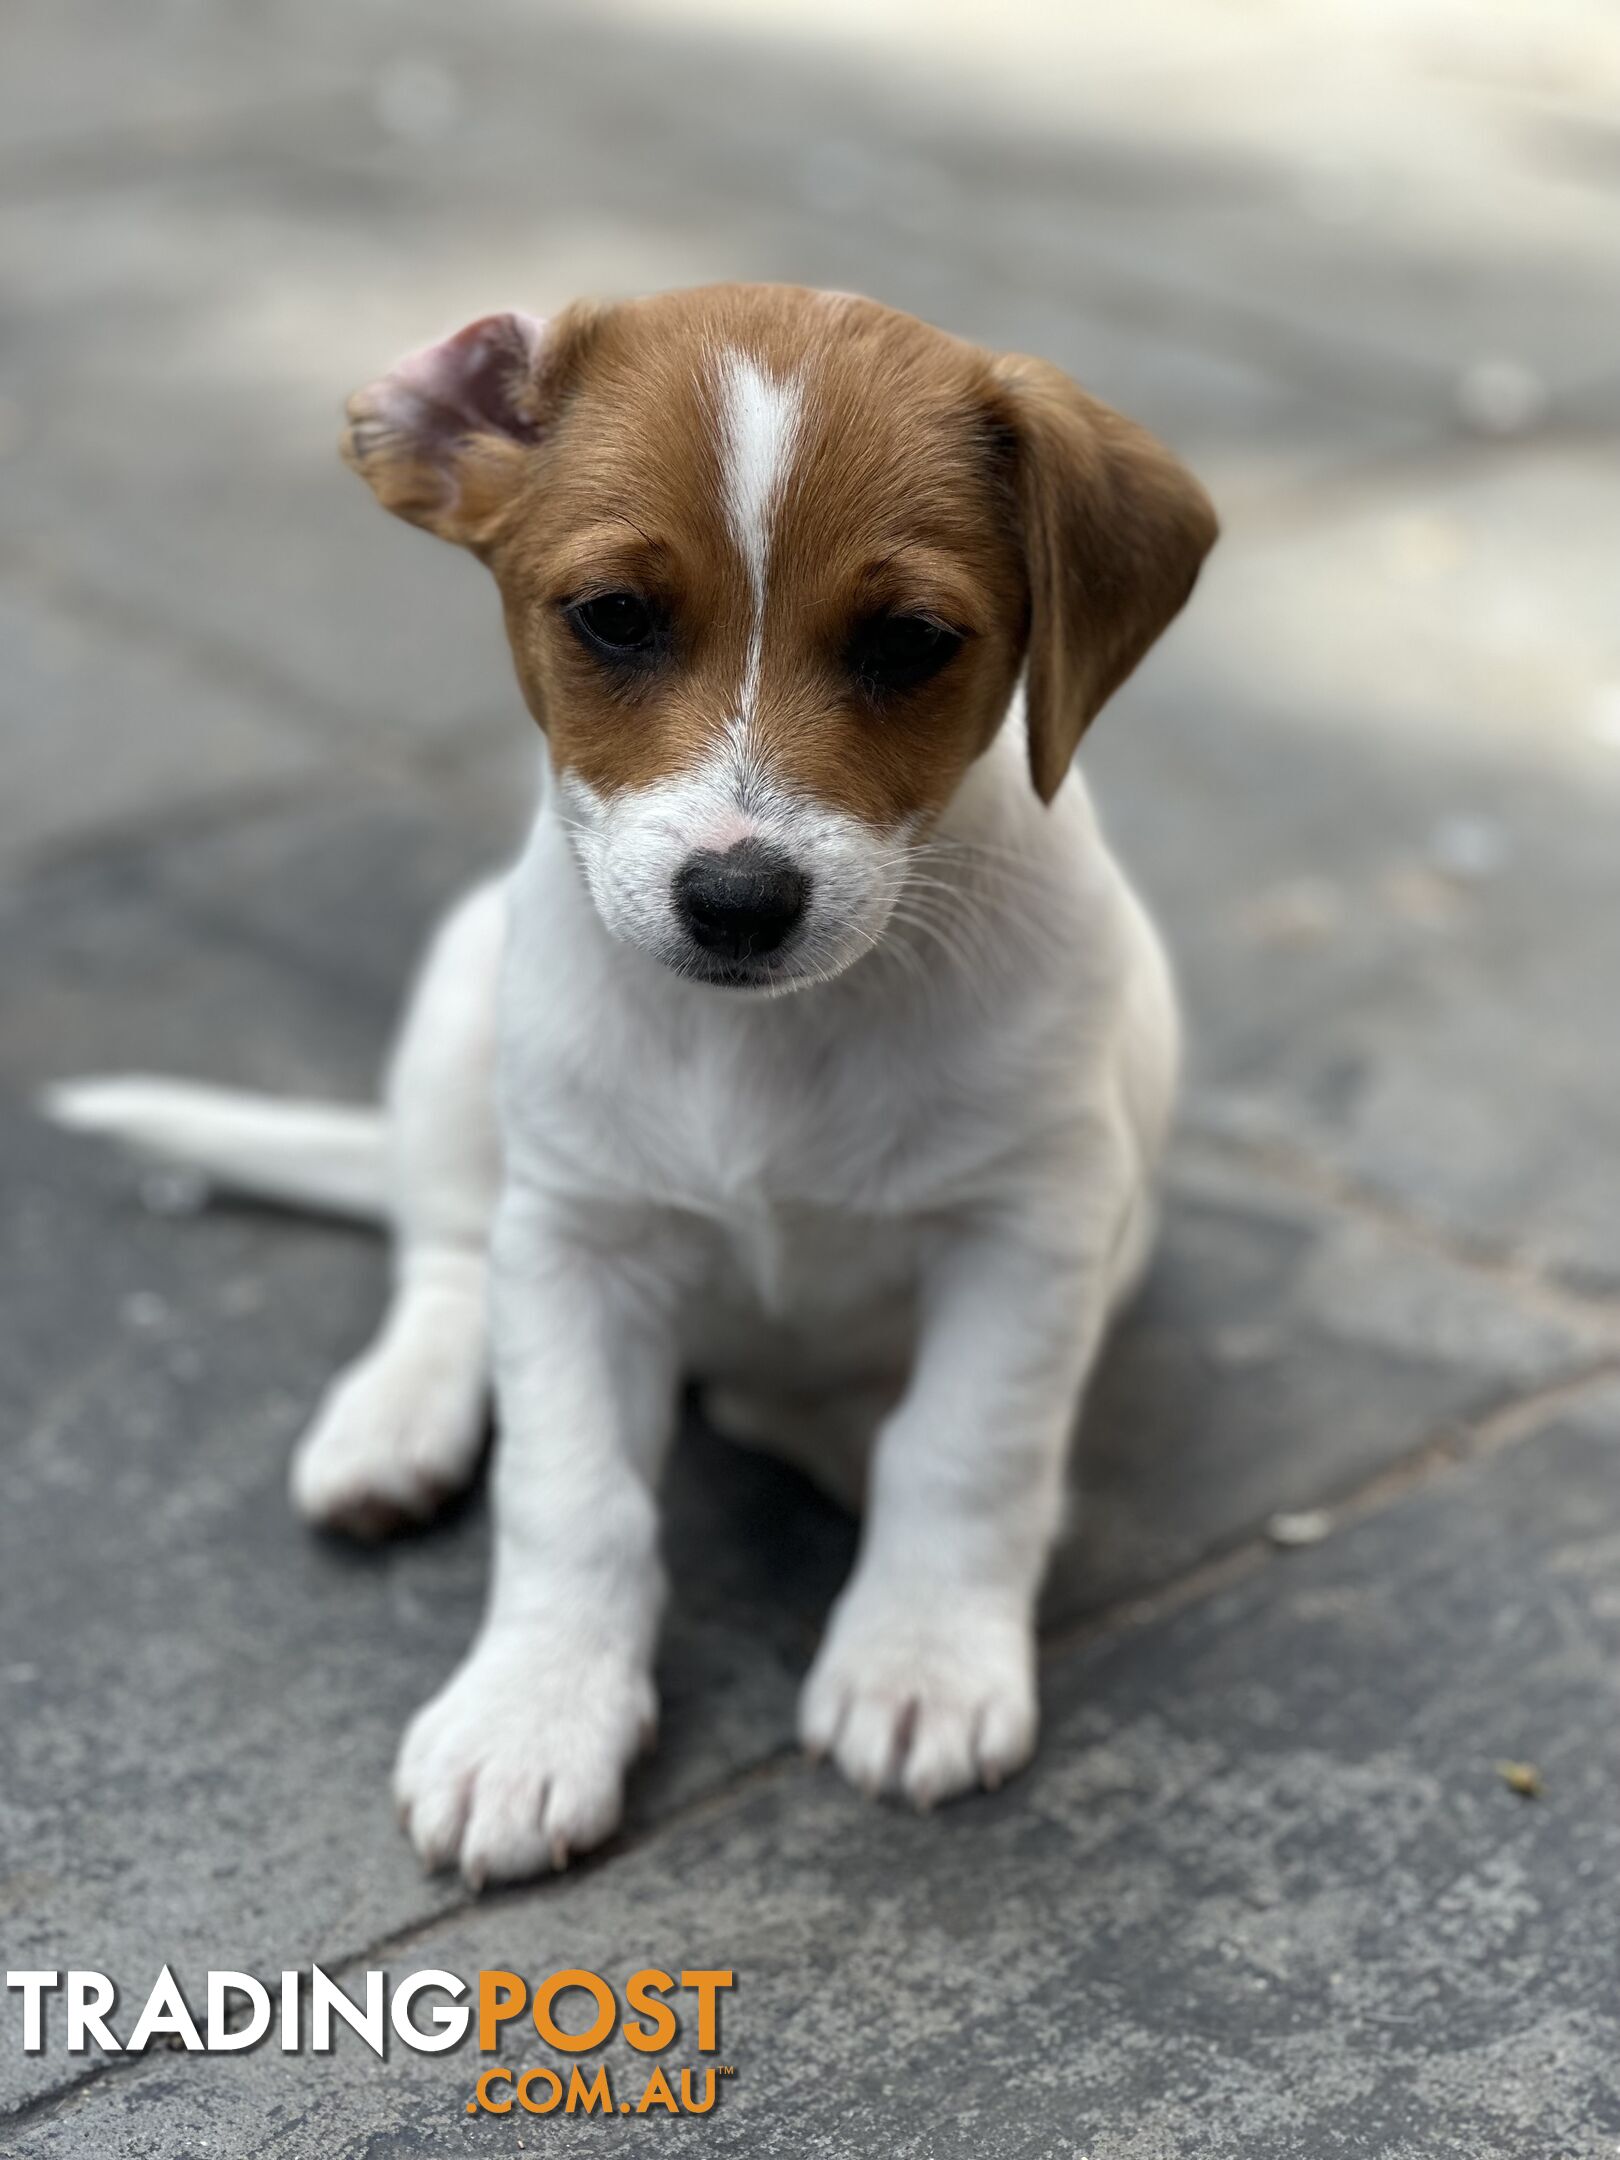 Pure breed Jack Russell puppies